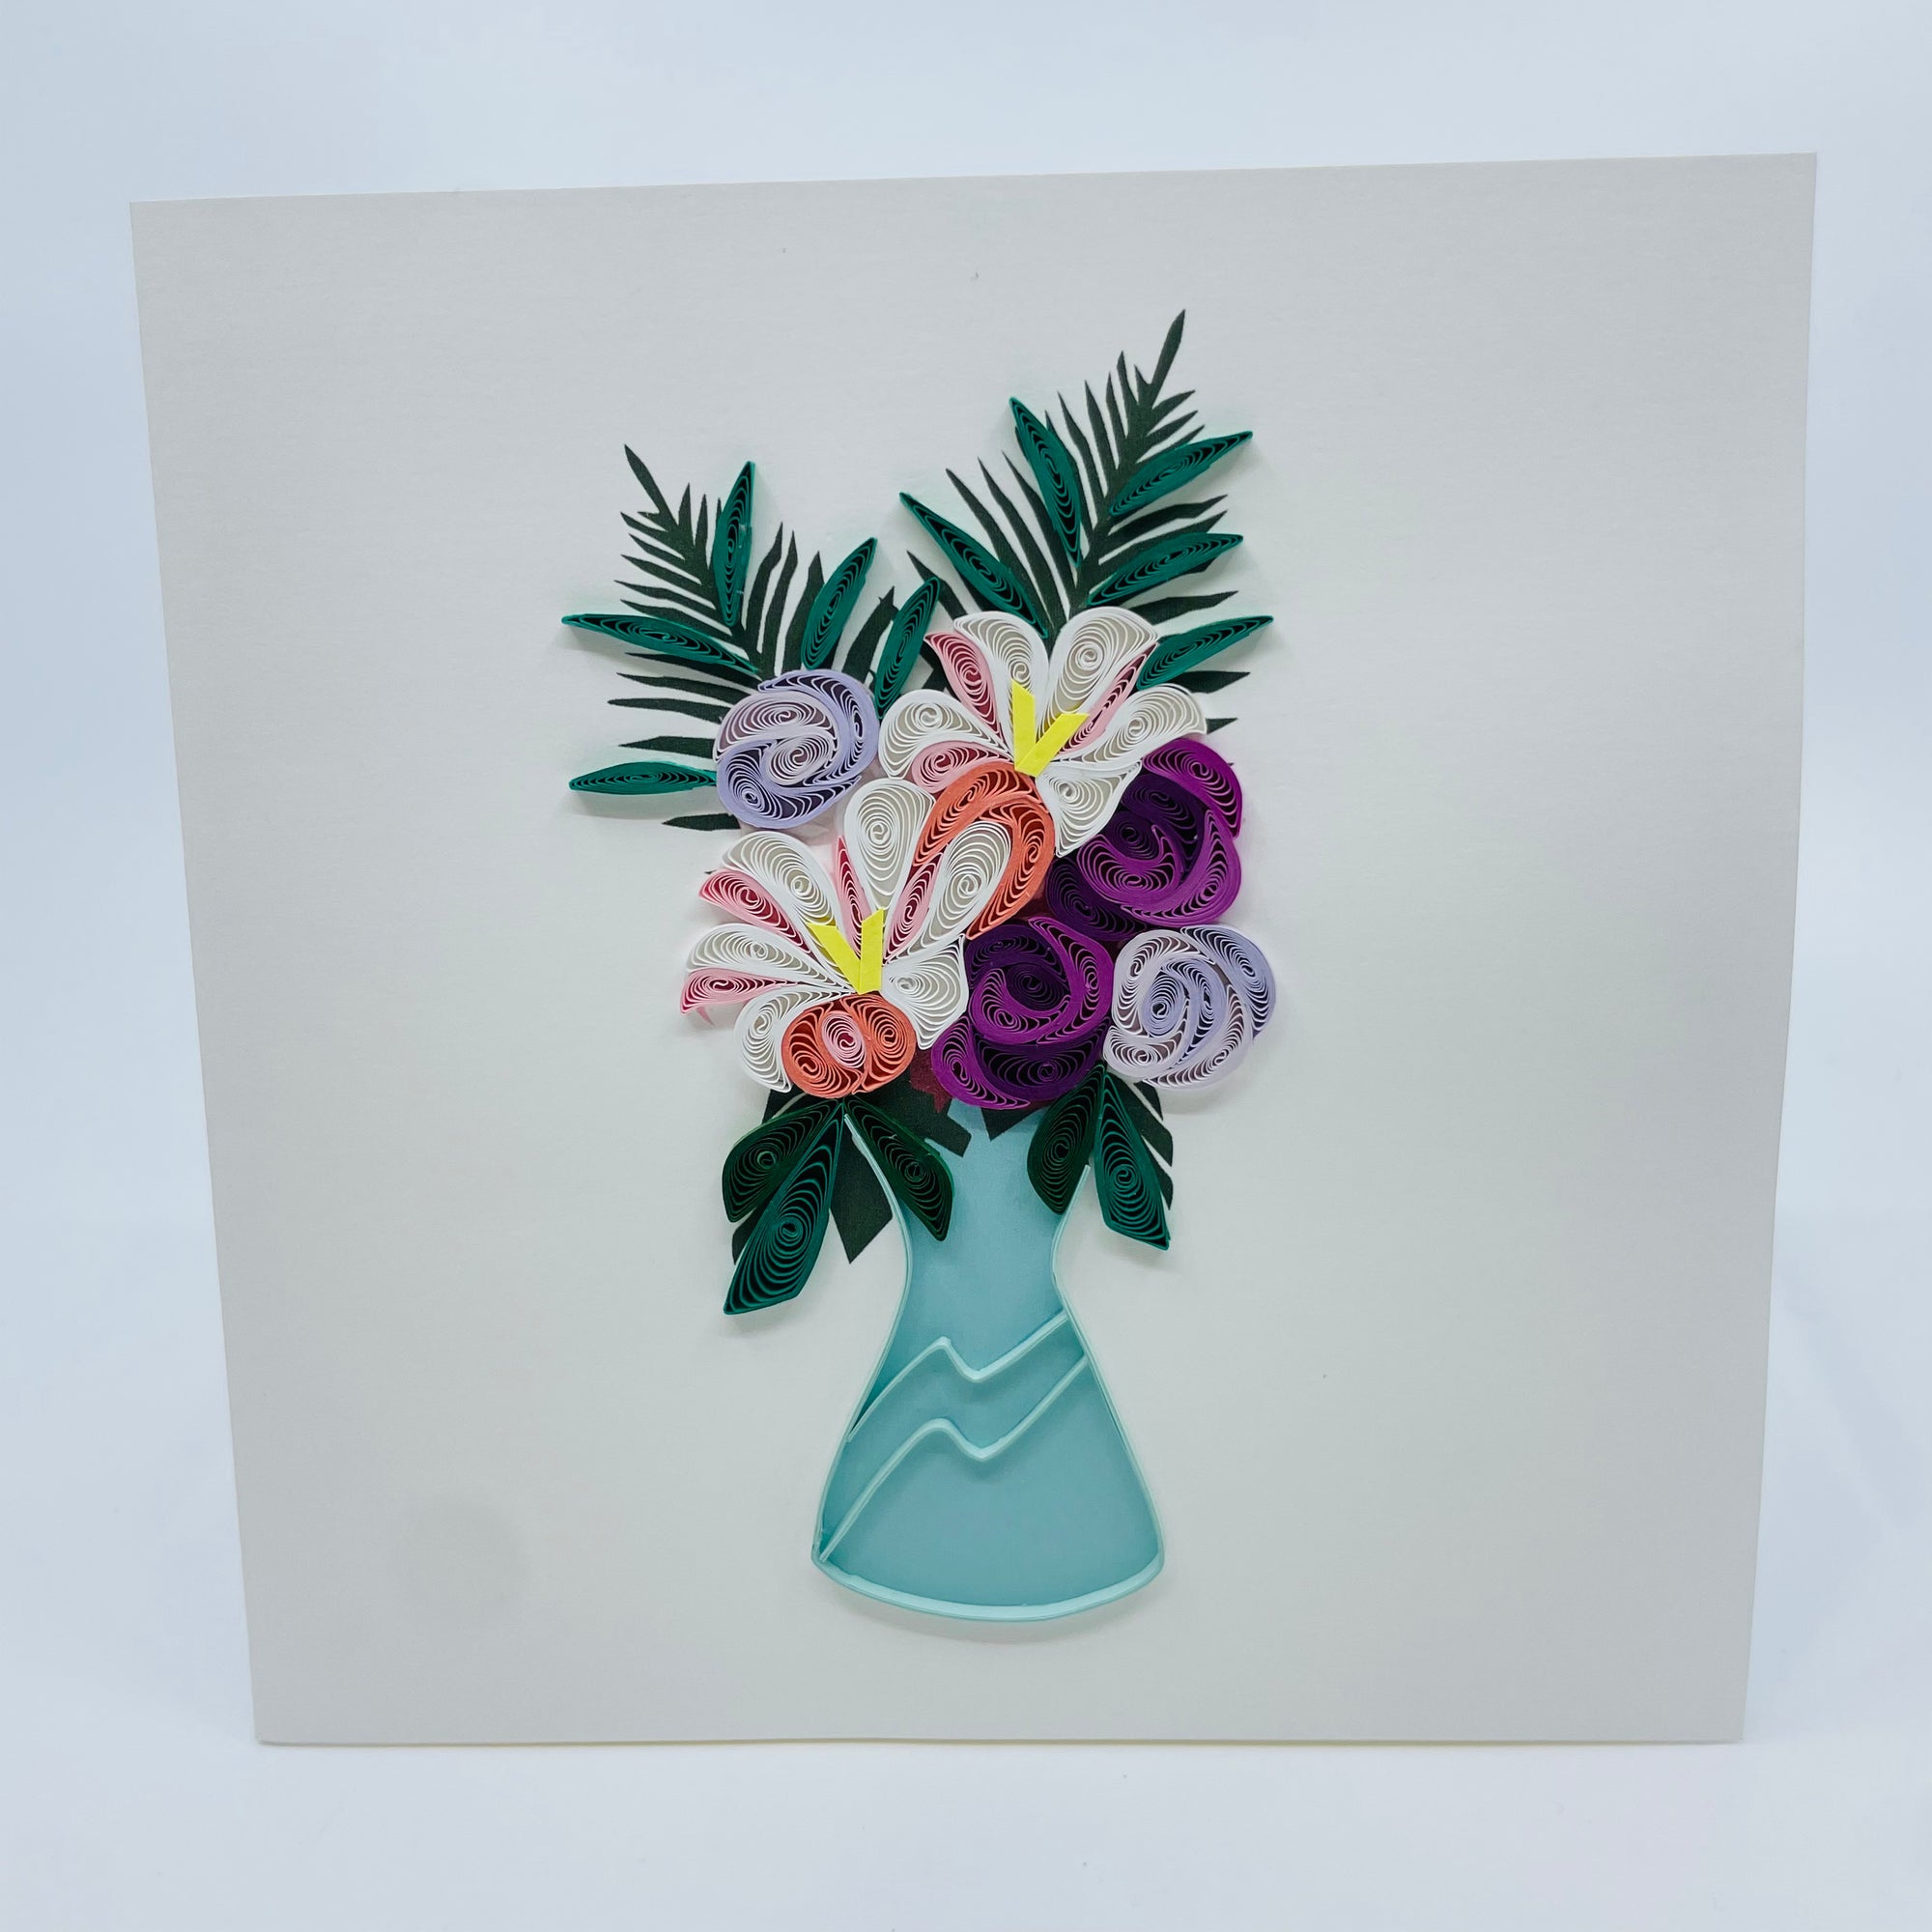 Quilling Art Card Flower Vase - Quilling Art Card Flower Vase -  - House of Himwitsa Native Art Gallery and Gifts